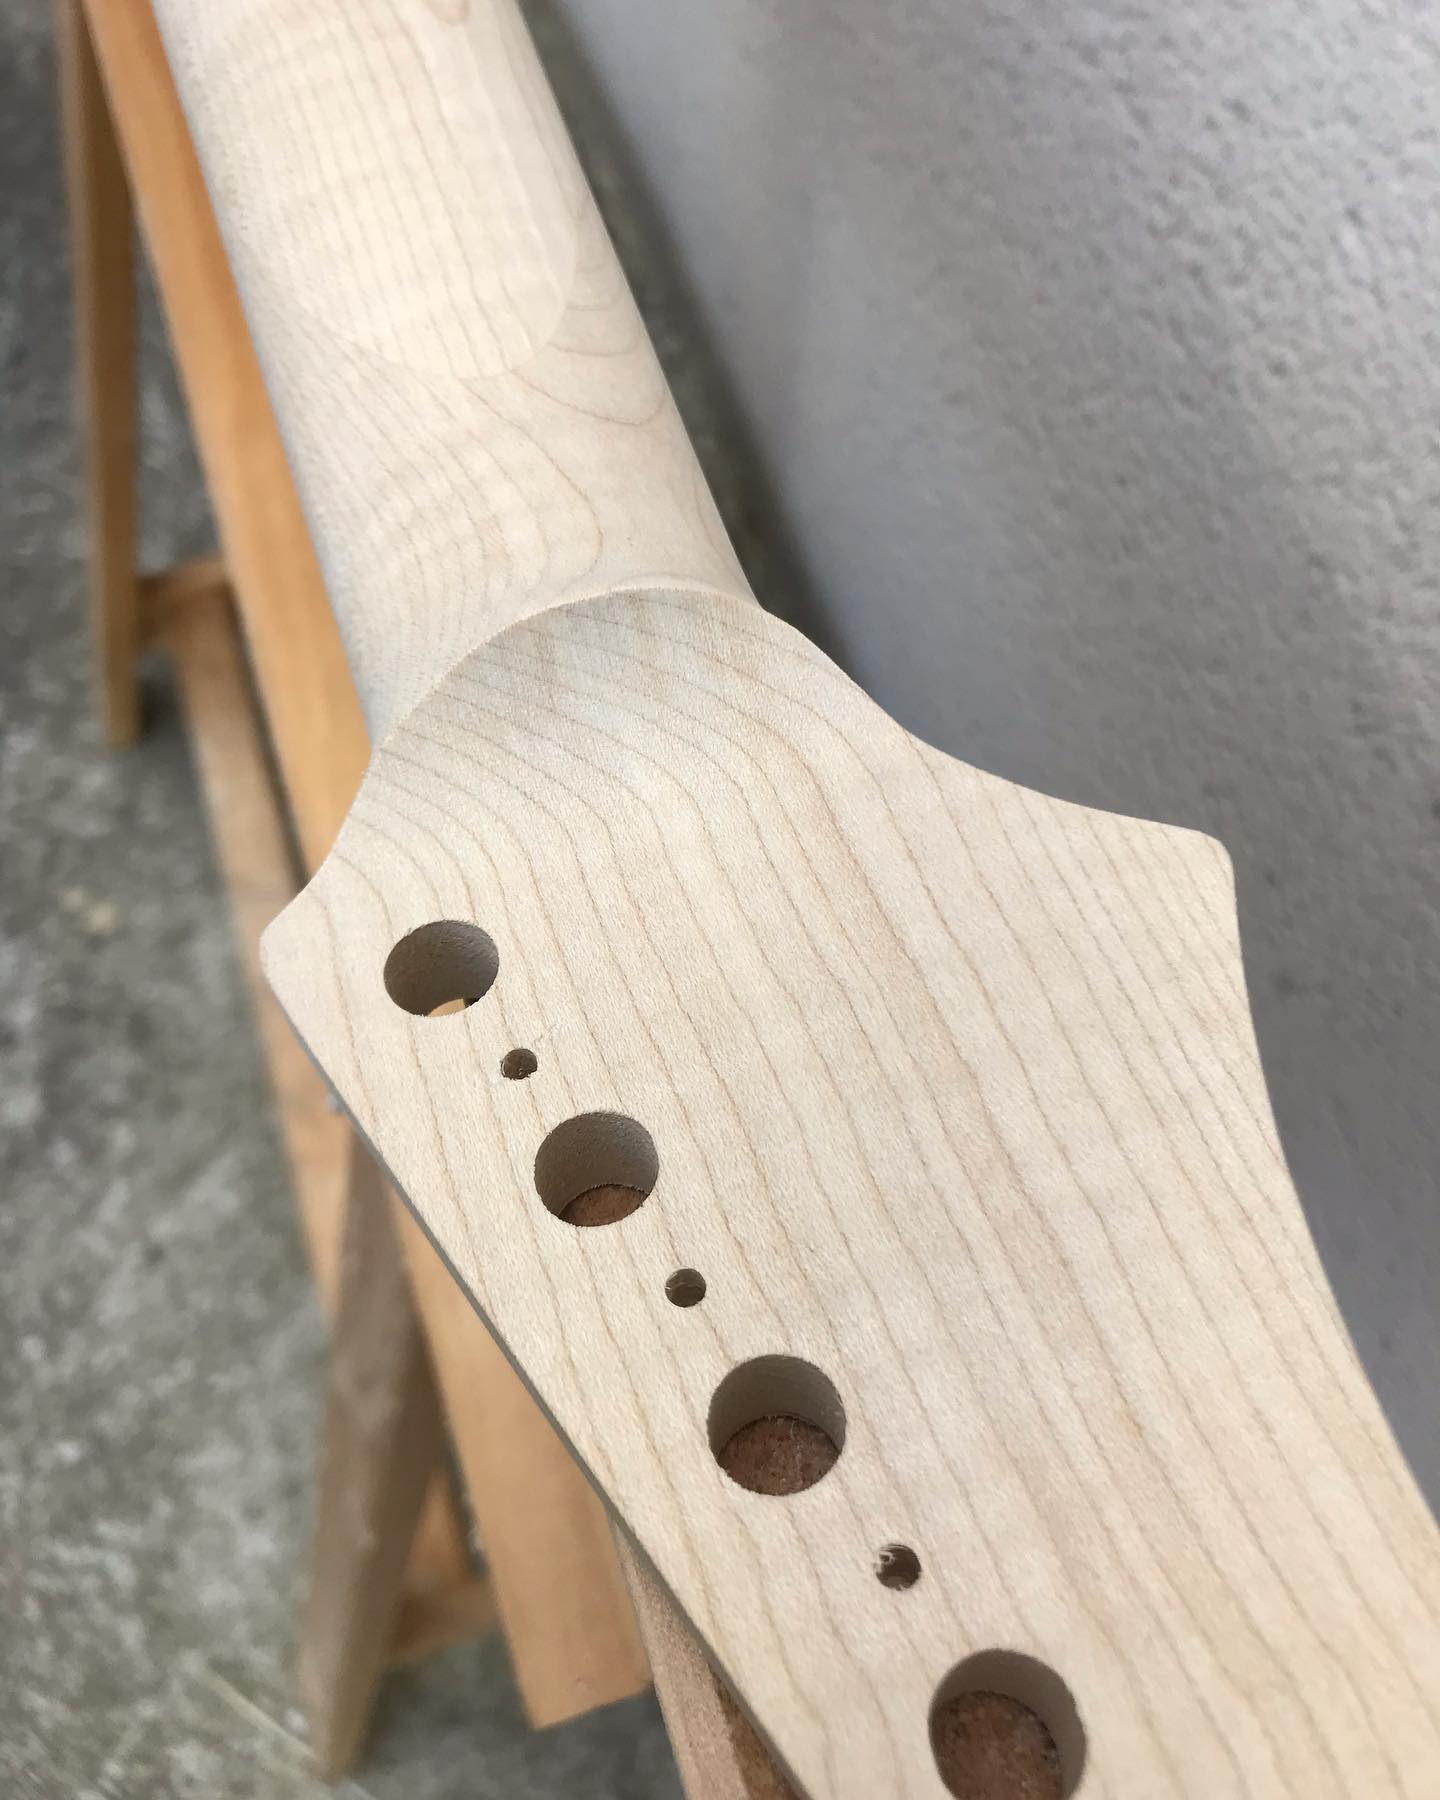 Team volute strikes again 😎
#guitar #guitare #guitarmaker #guitarmaking #luthier #lutherie #mapleneck #woodworking #superstrat #supertele